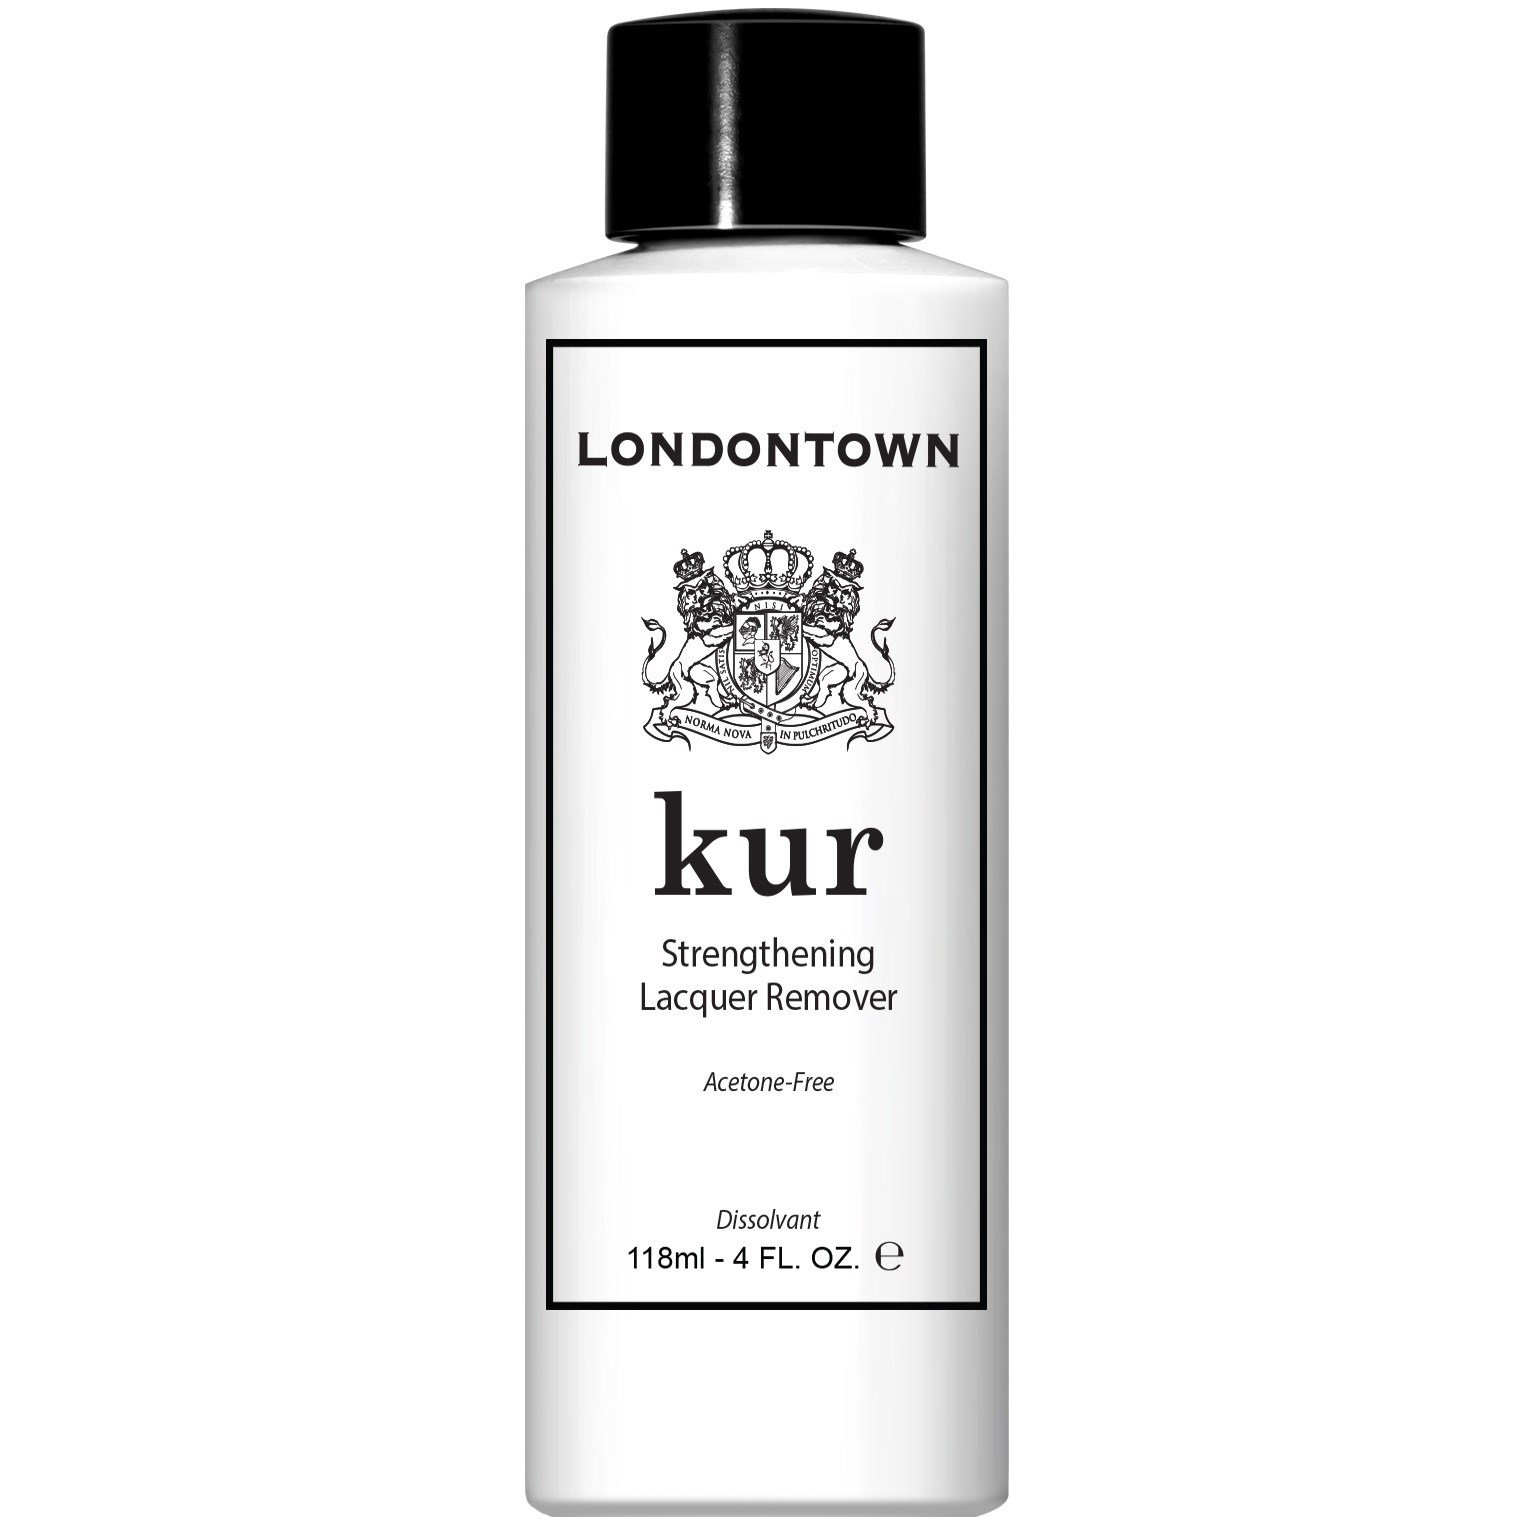 LONDONTOWN Kur Strengthening Lacquer Remover 118 ml